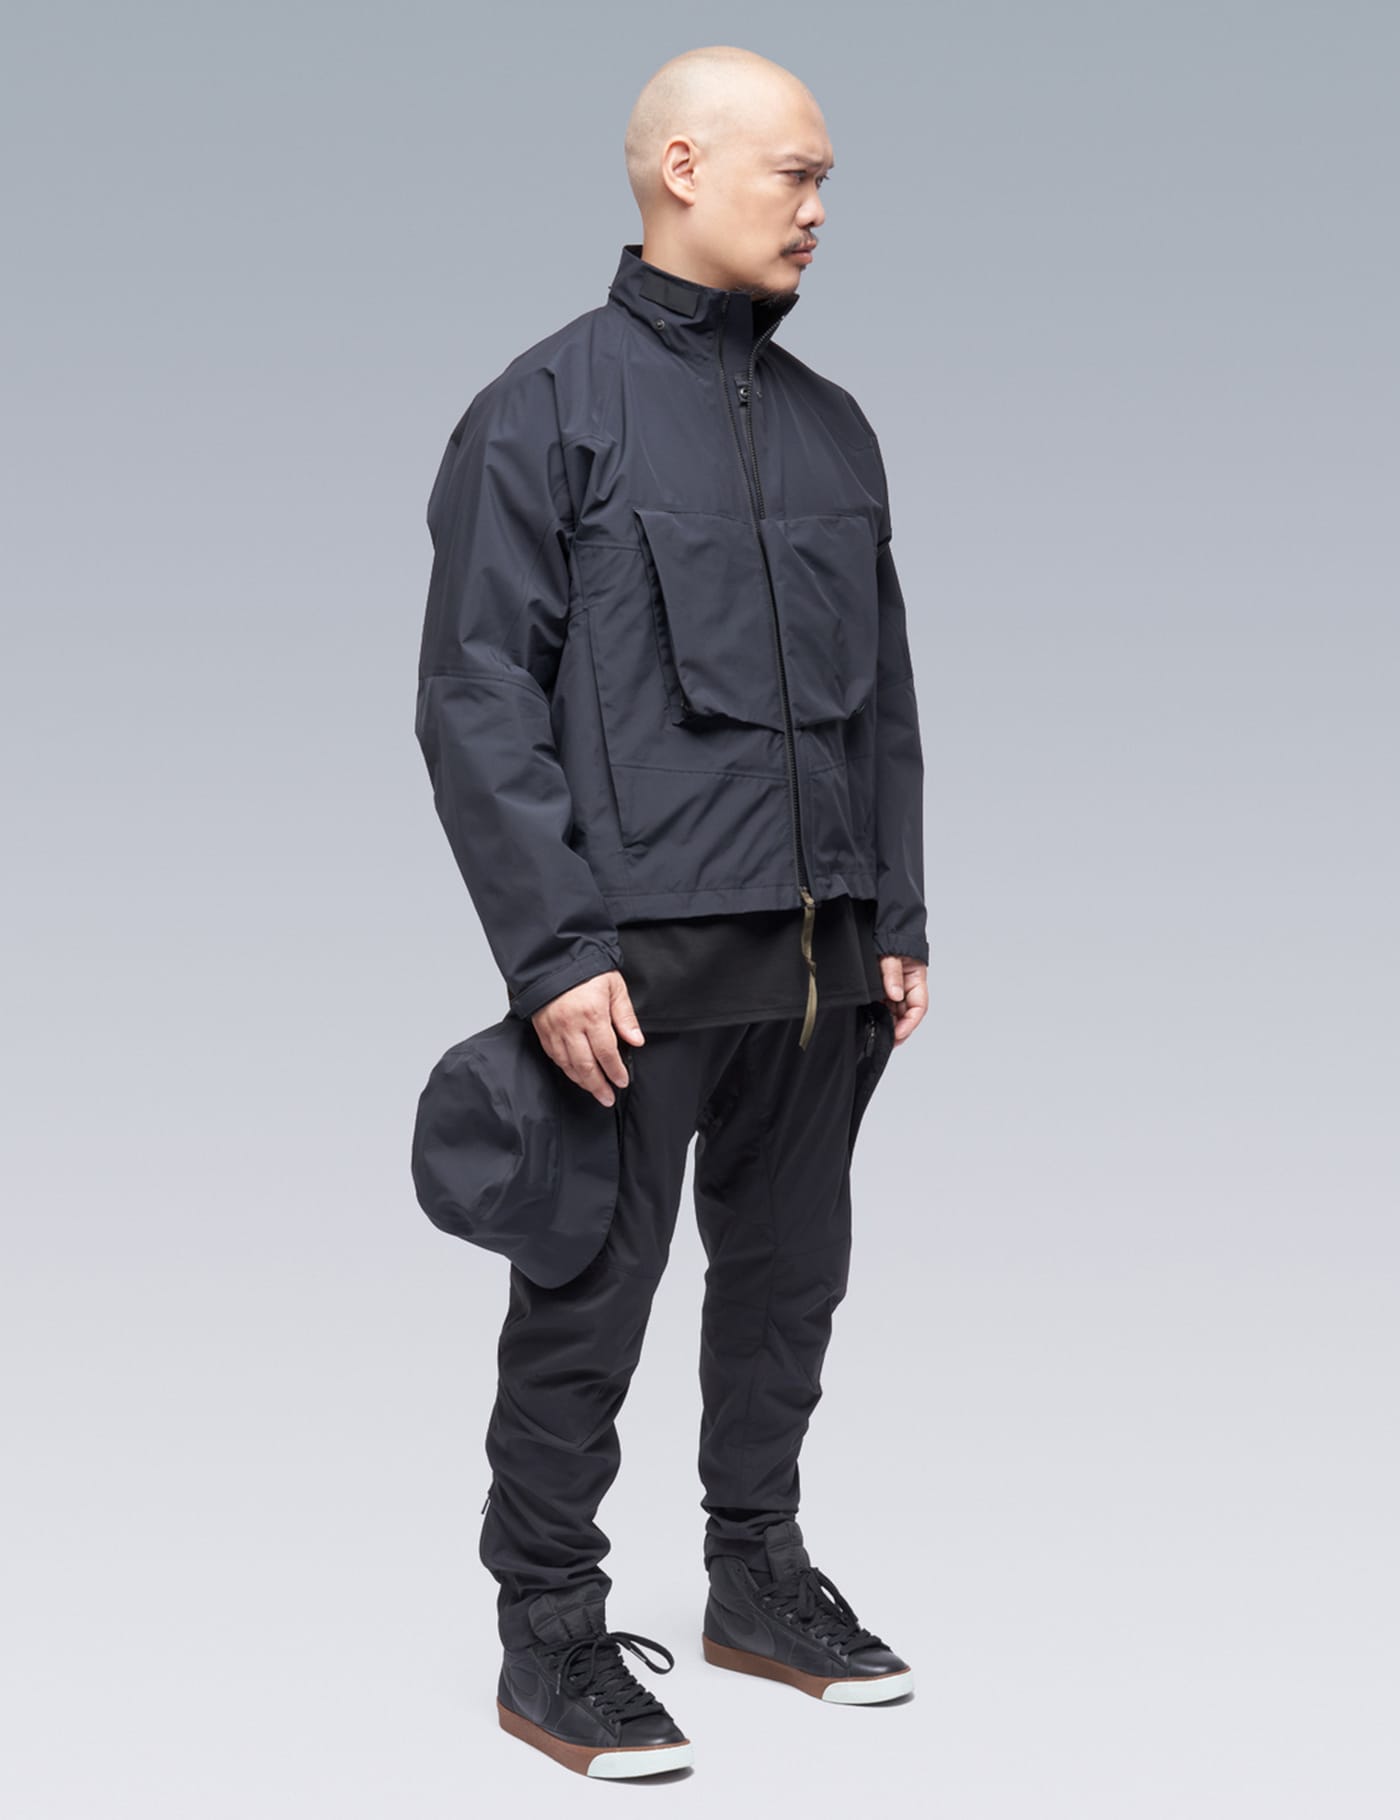 ACRONYM - J96-GT Jacket | HBX - Globally Curated Fashion and Lifestyle by  Hypebeast